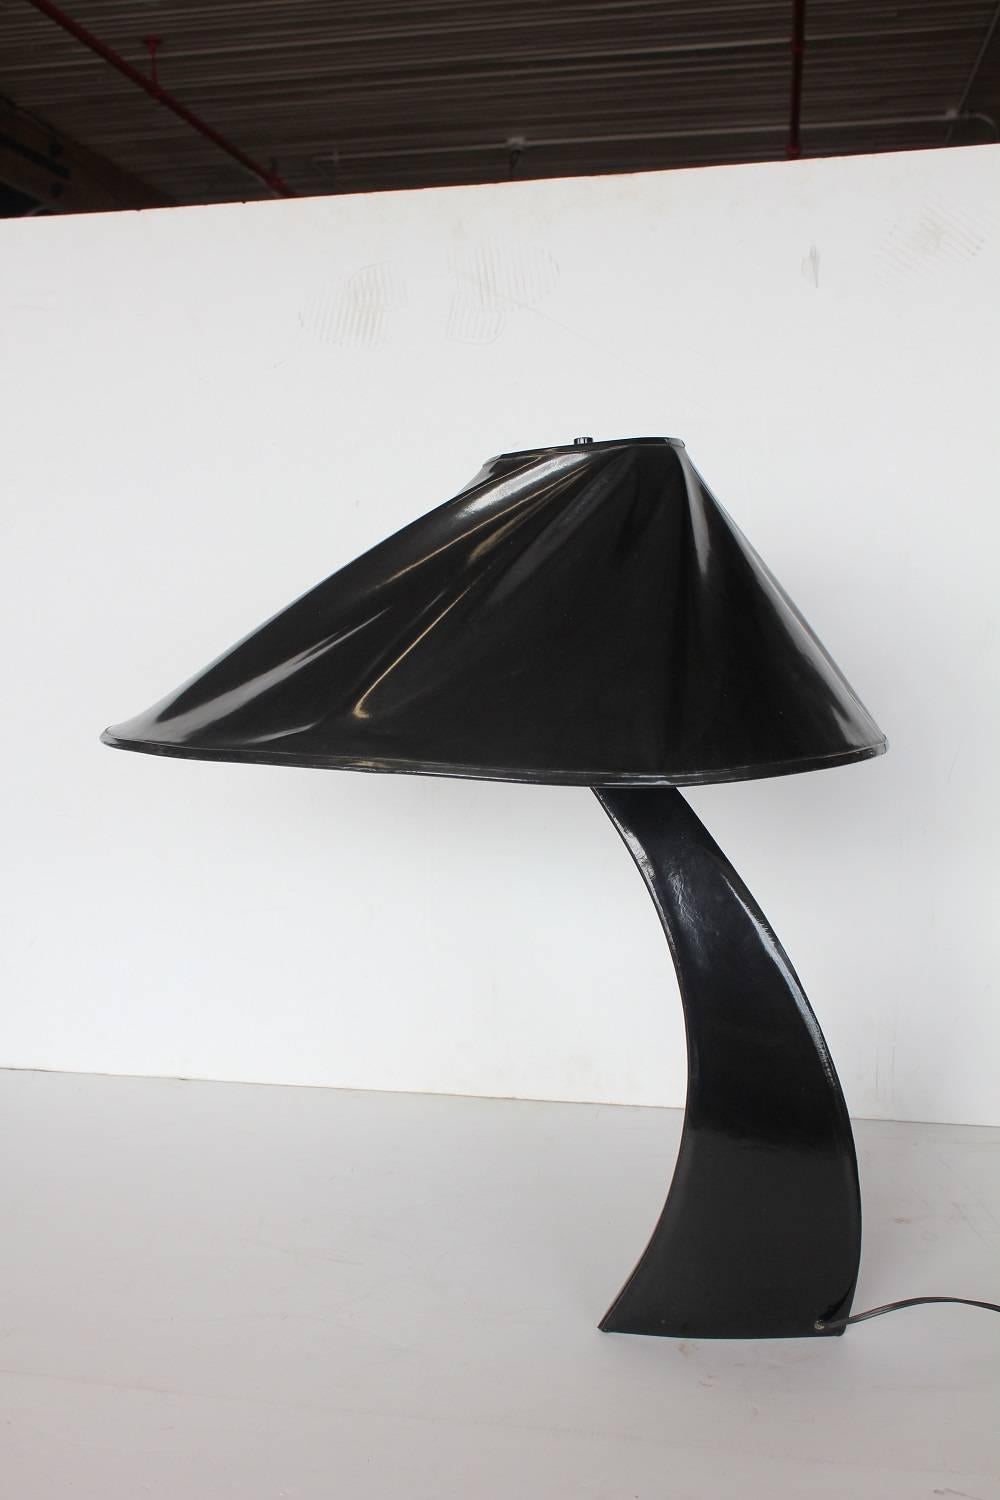 Stylish modern patent leather table lamp by Walh. It is signed. Made in 1988.